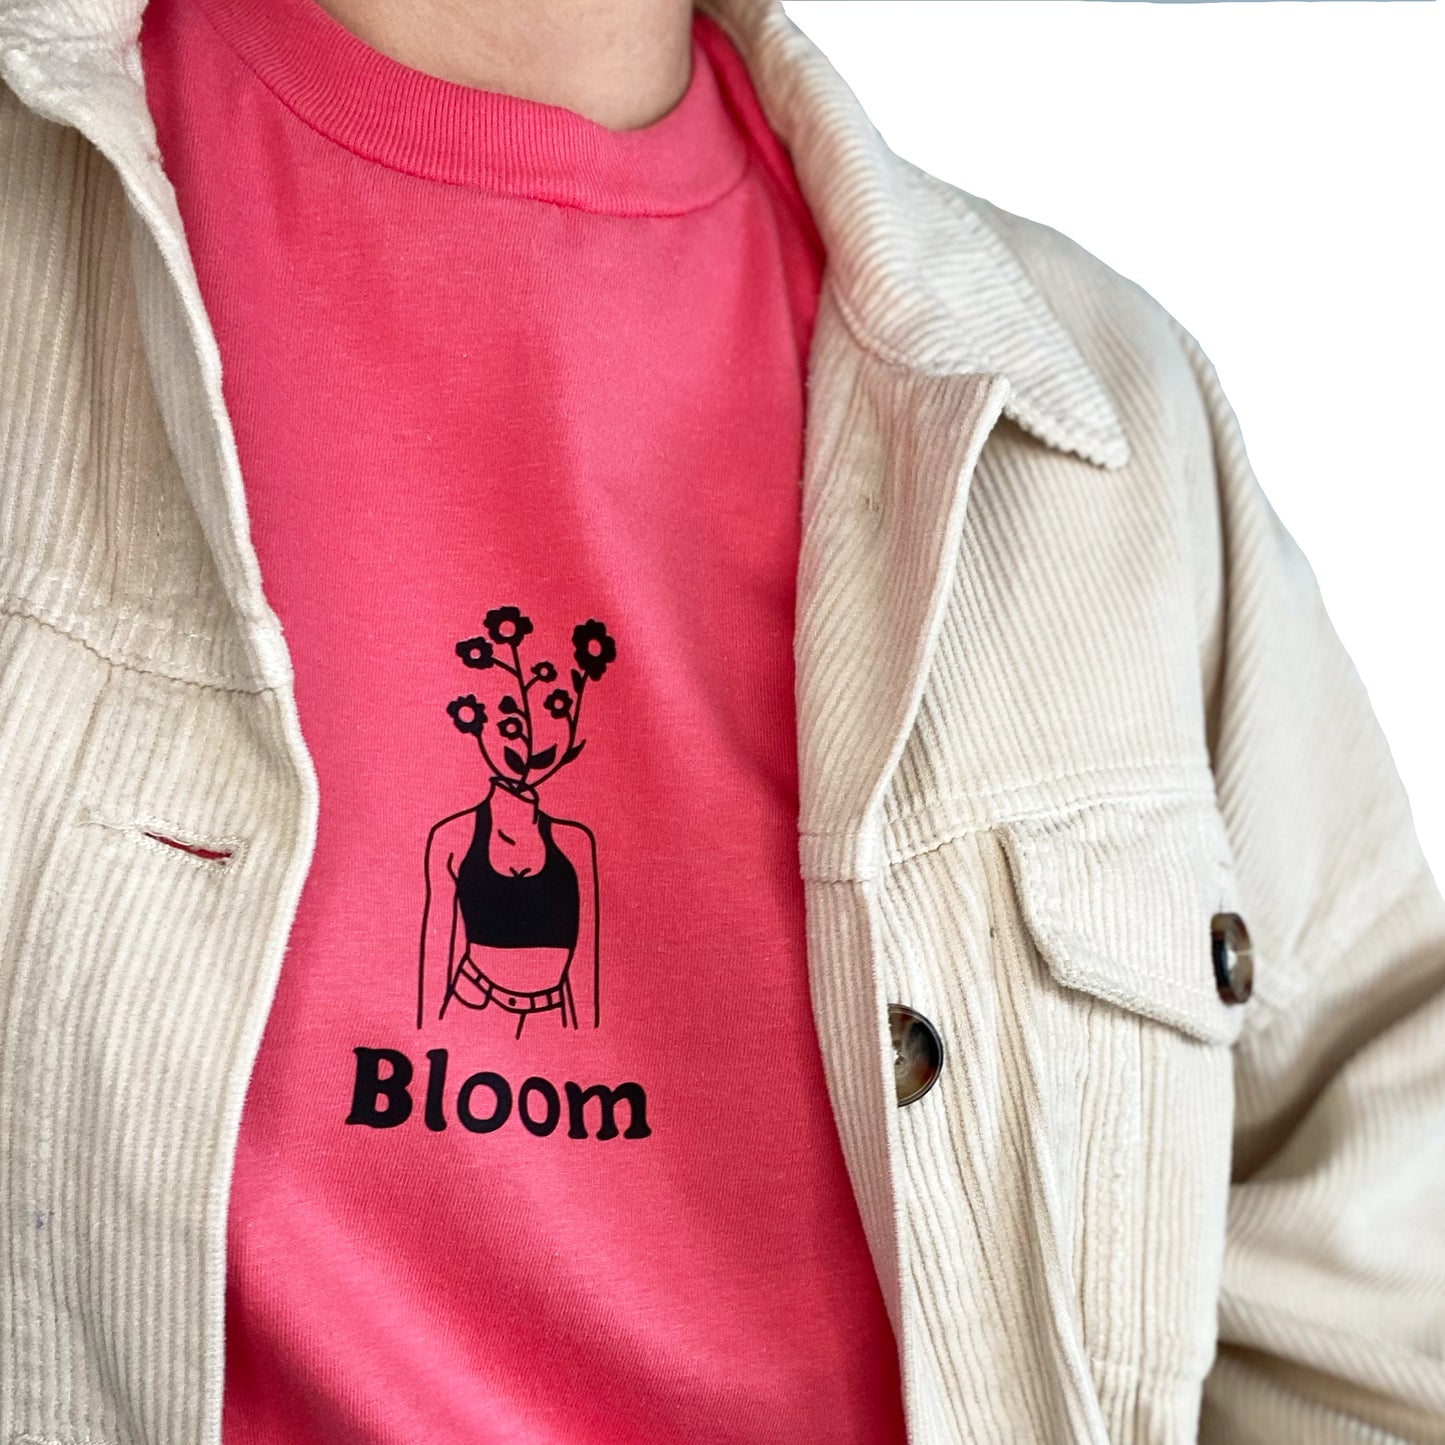 'Bloom' feminist graphic tee in coral